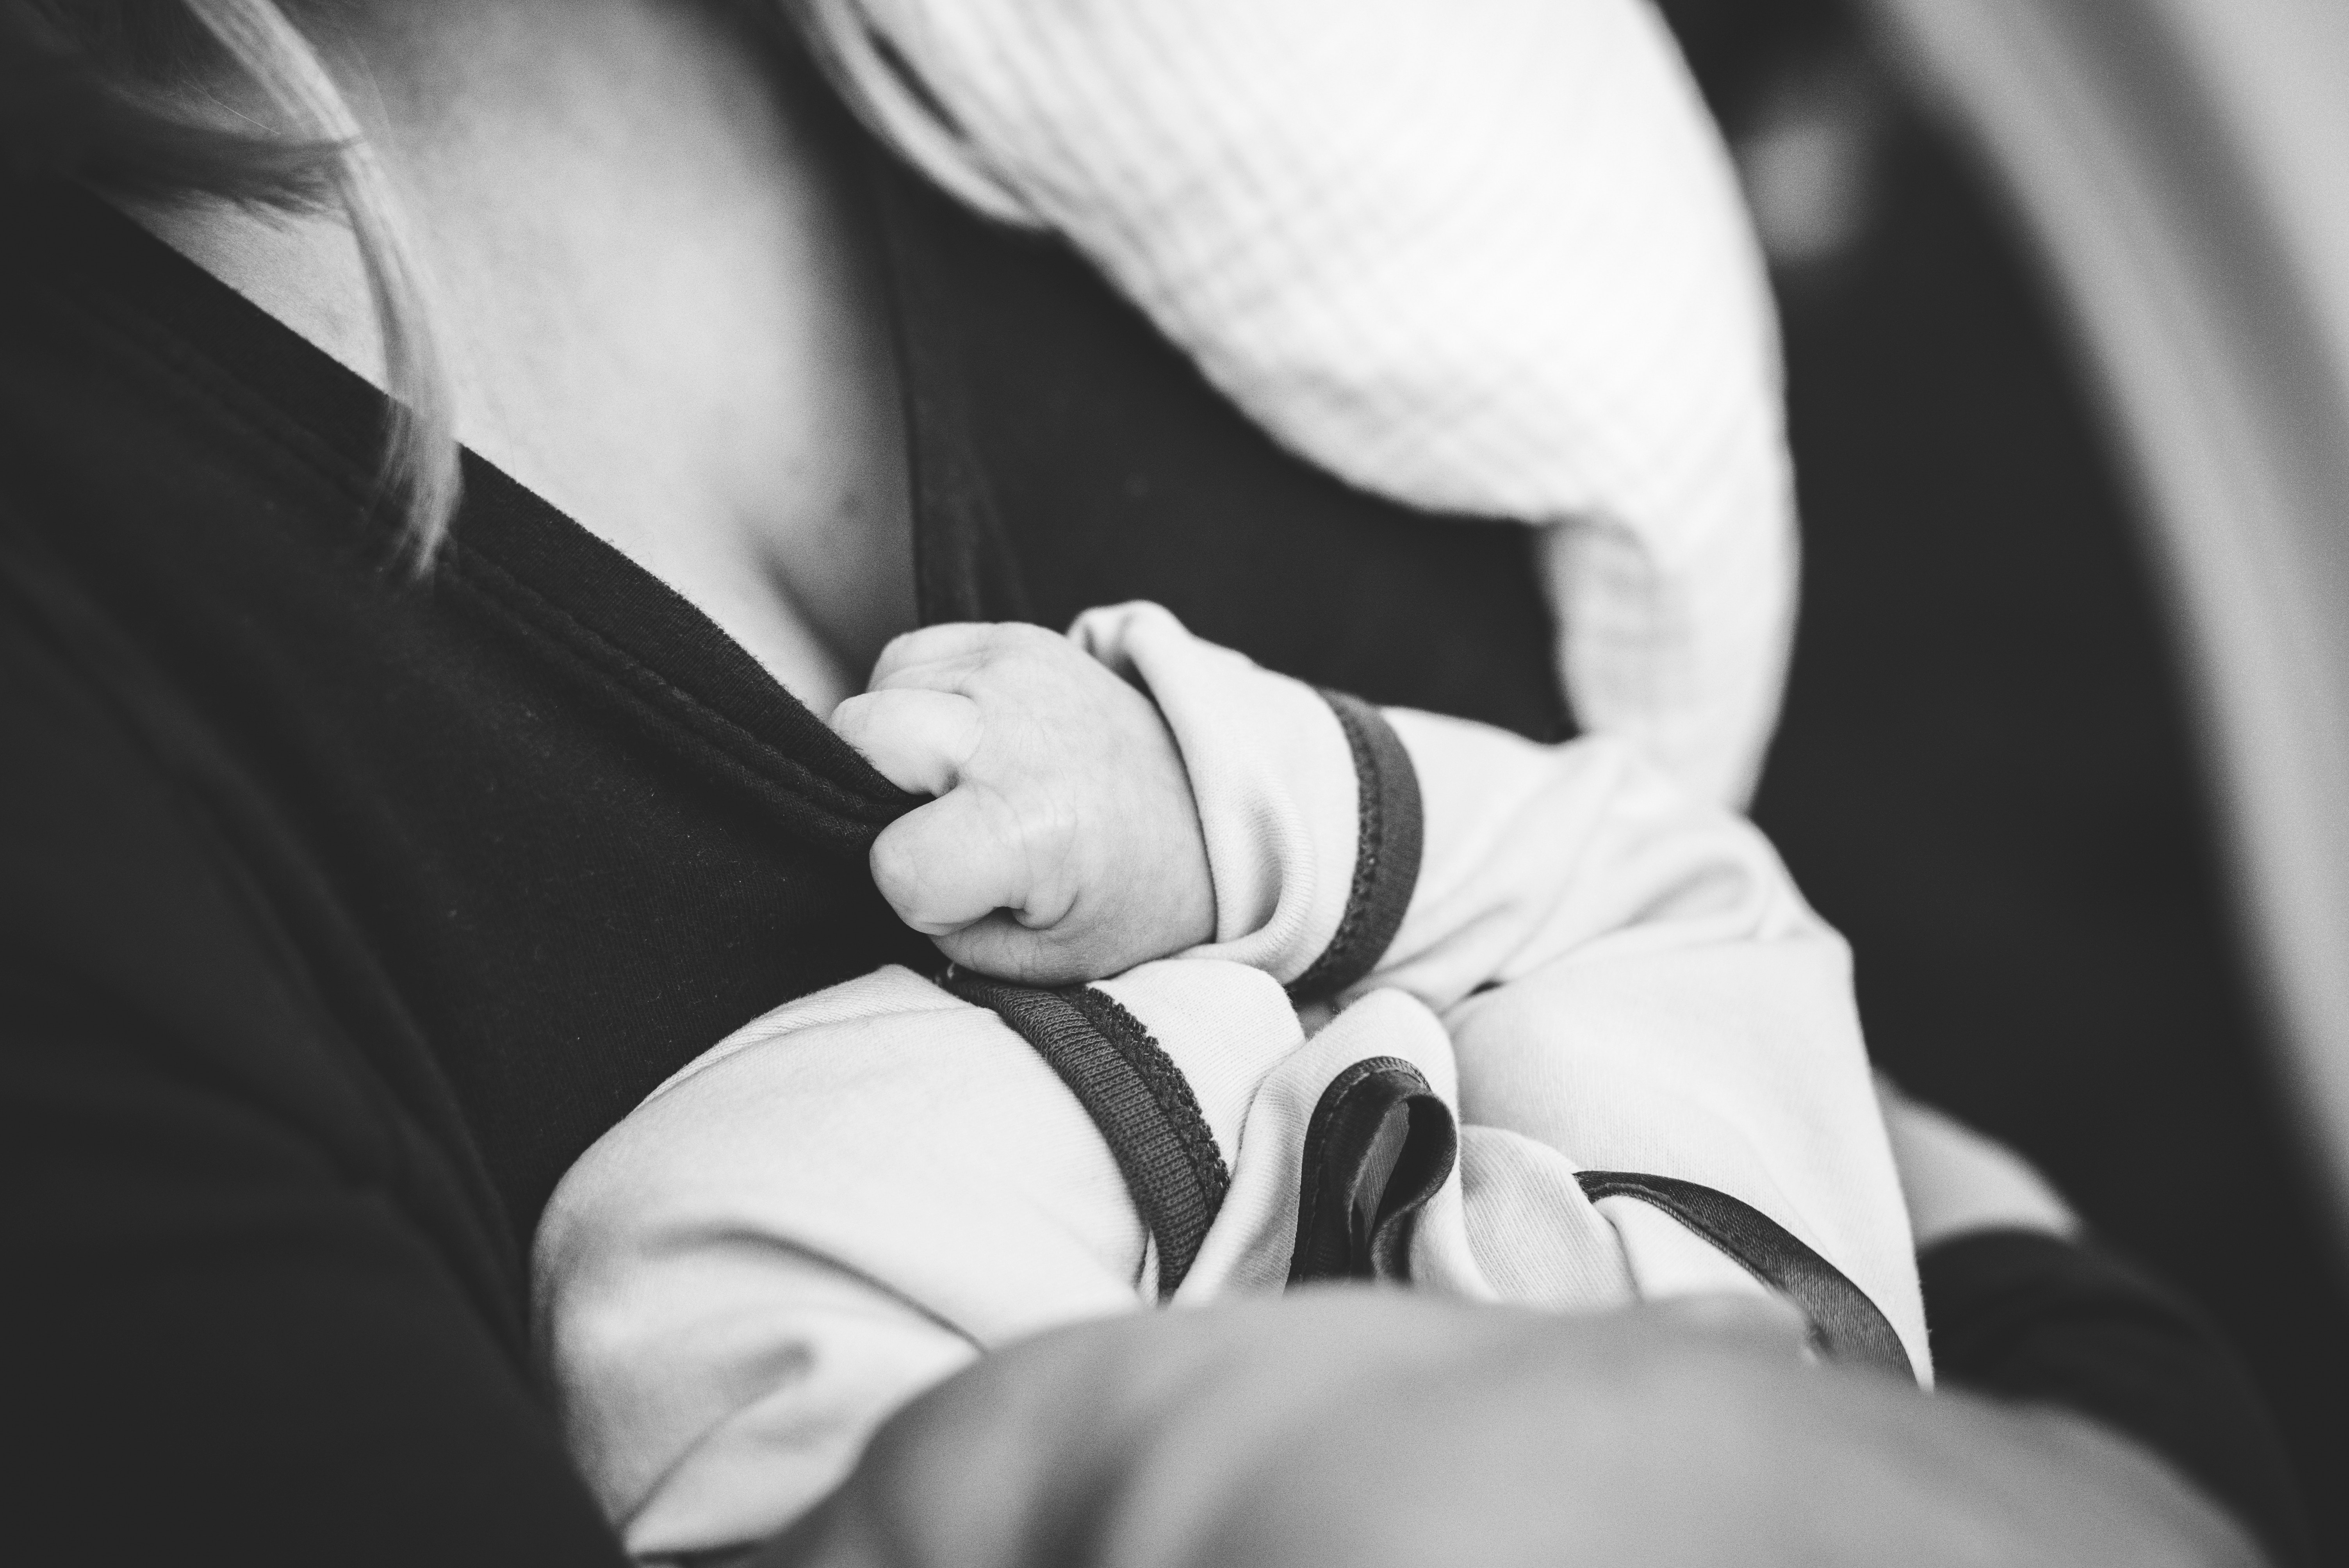 What no one tells you about breastfeeding